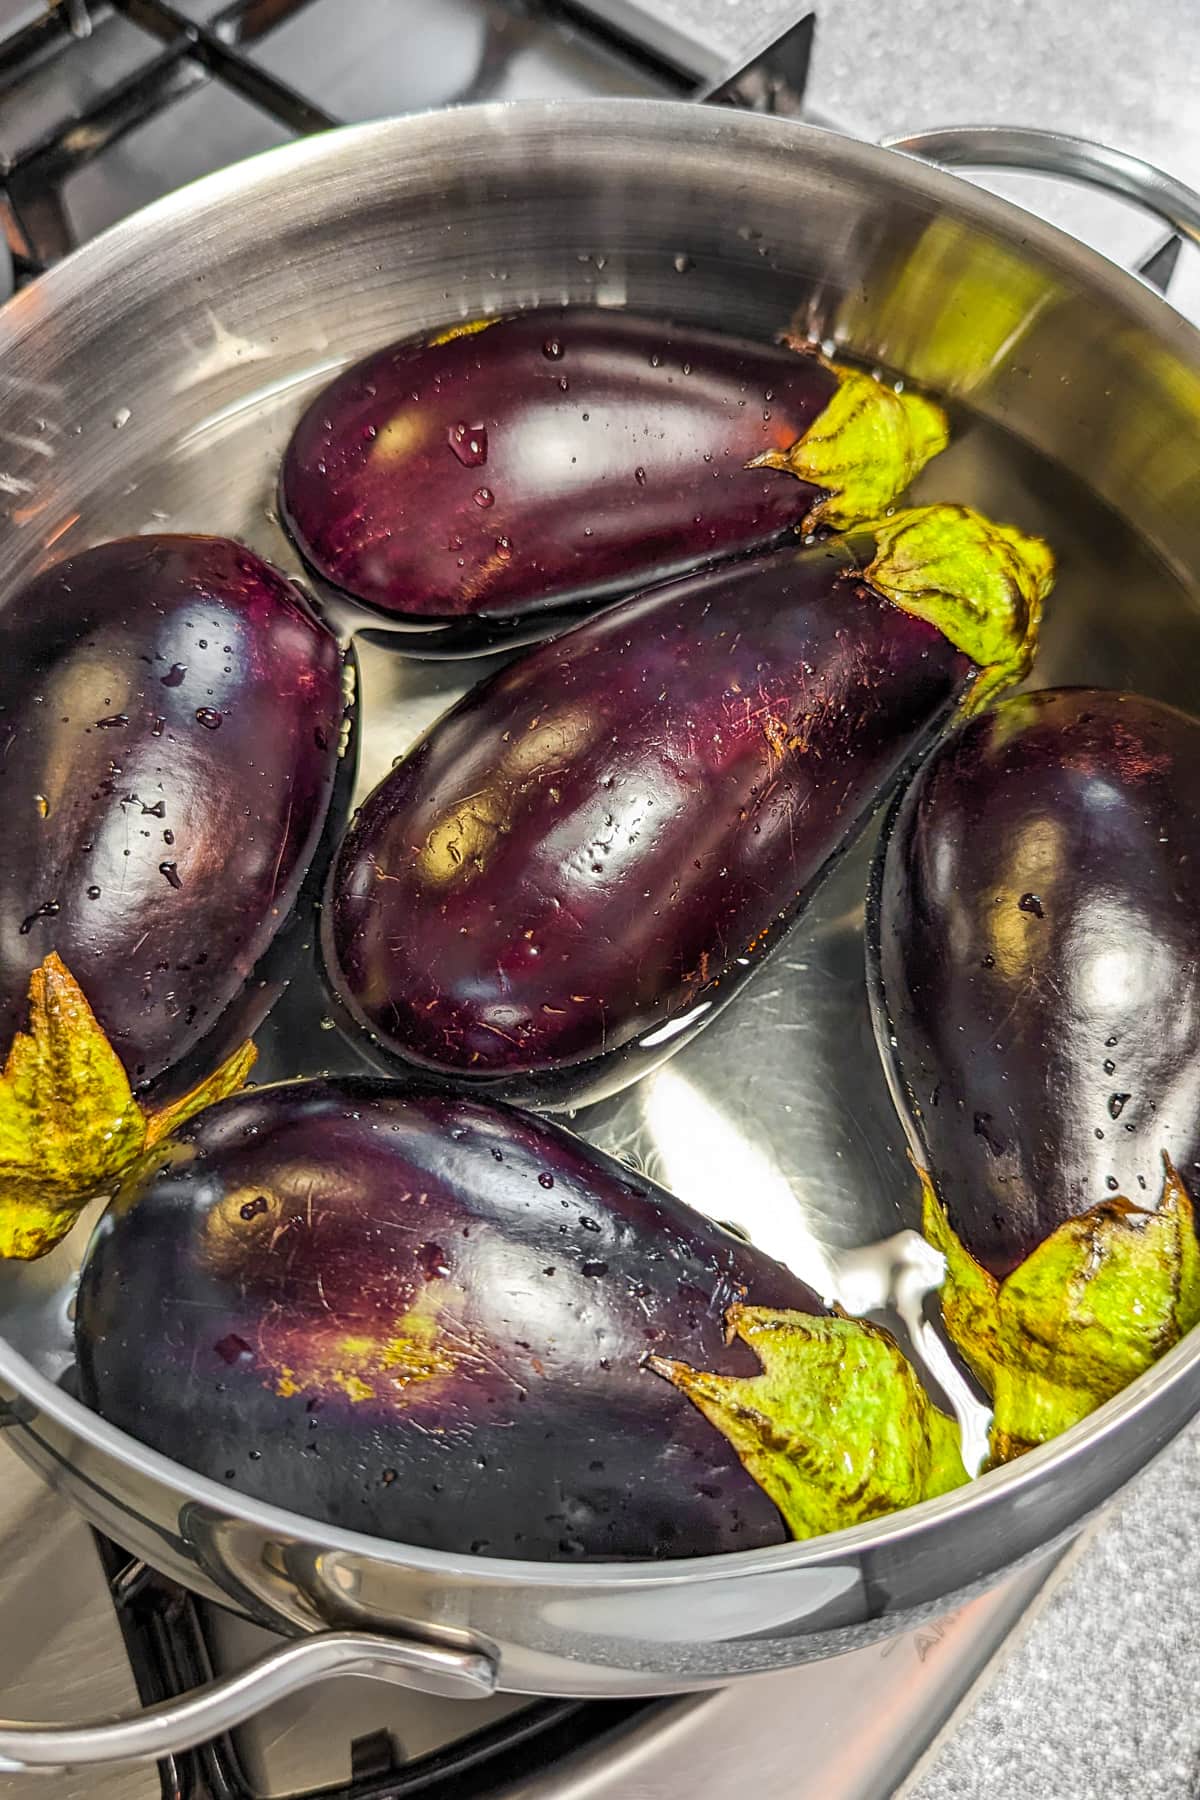 5 small eggplants soaked in water in an aluminum pan on the stove.